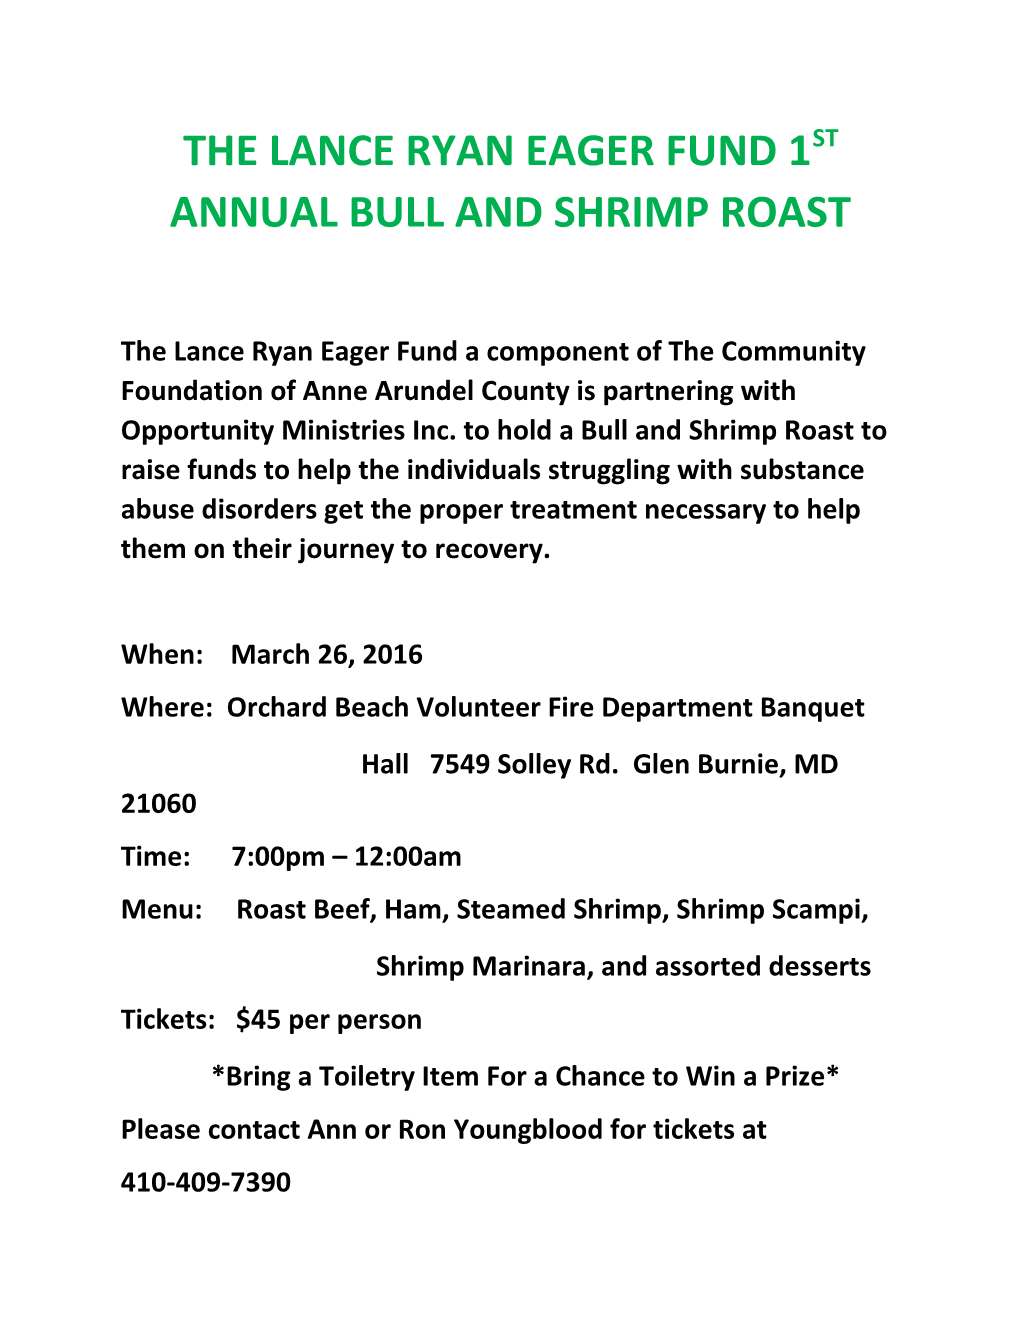 The Lance Ryan Eager Fund 1St Annual Bull and Shrimp Roast